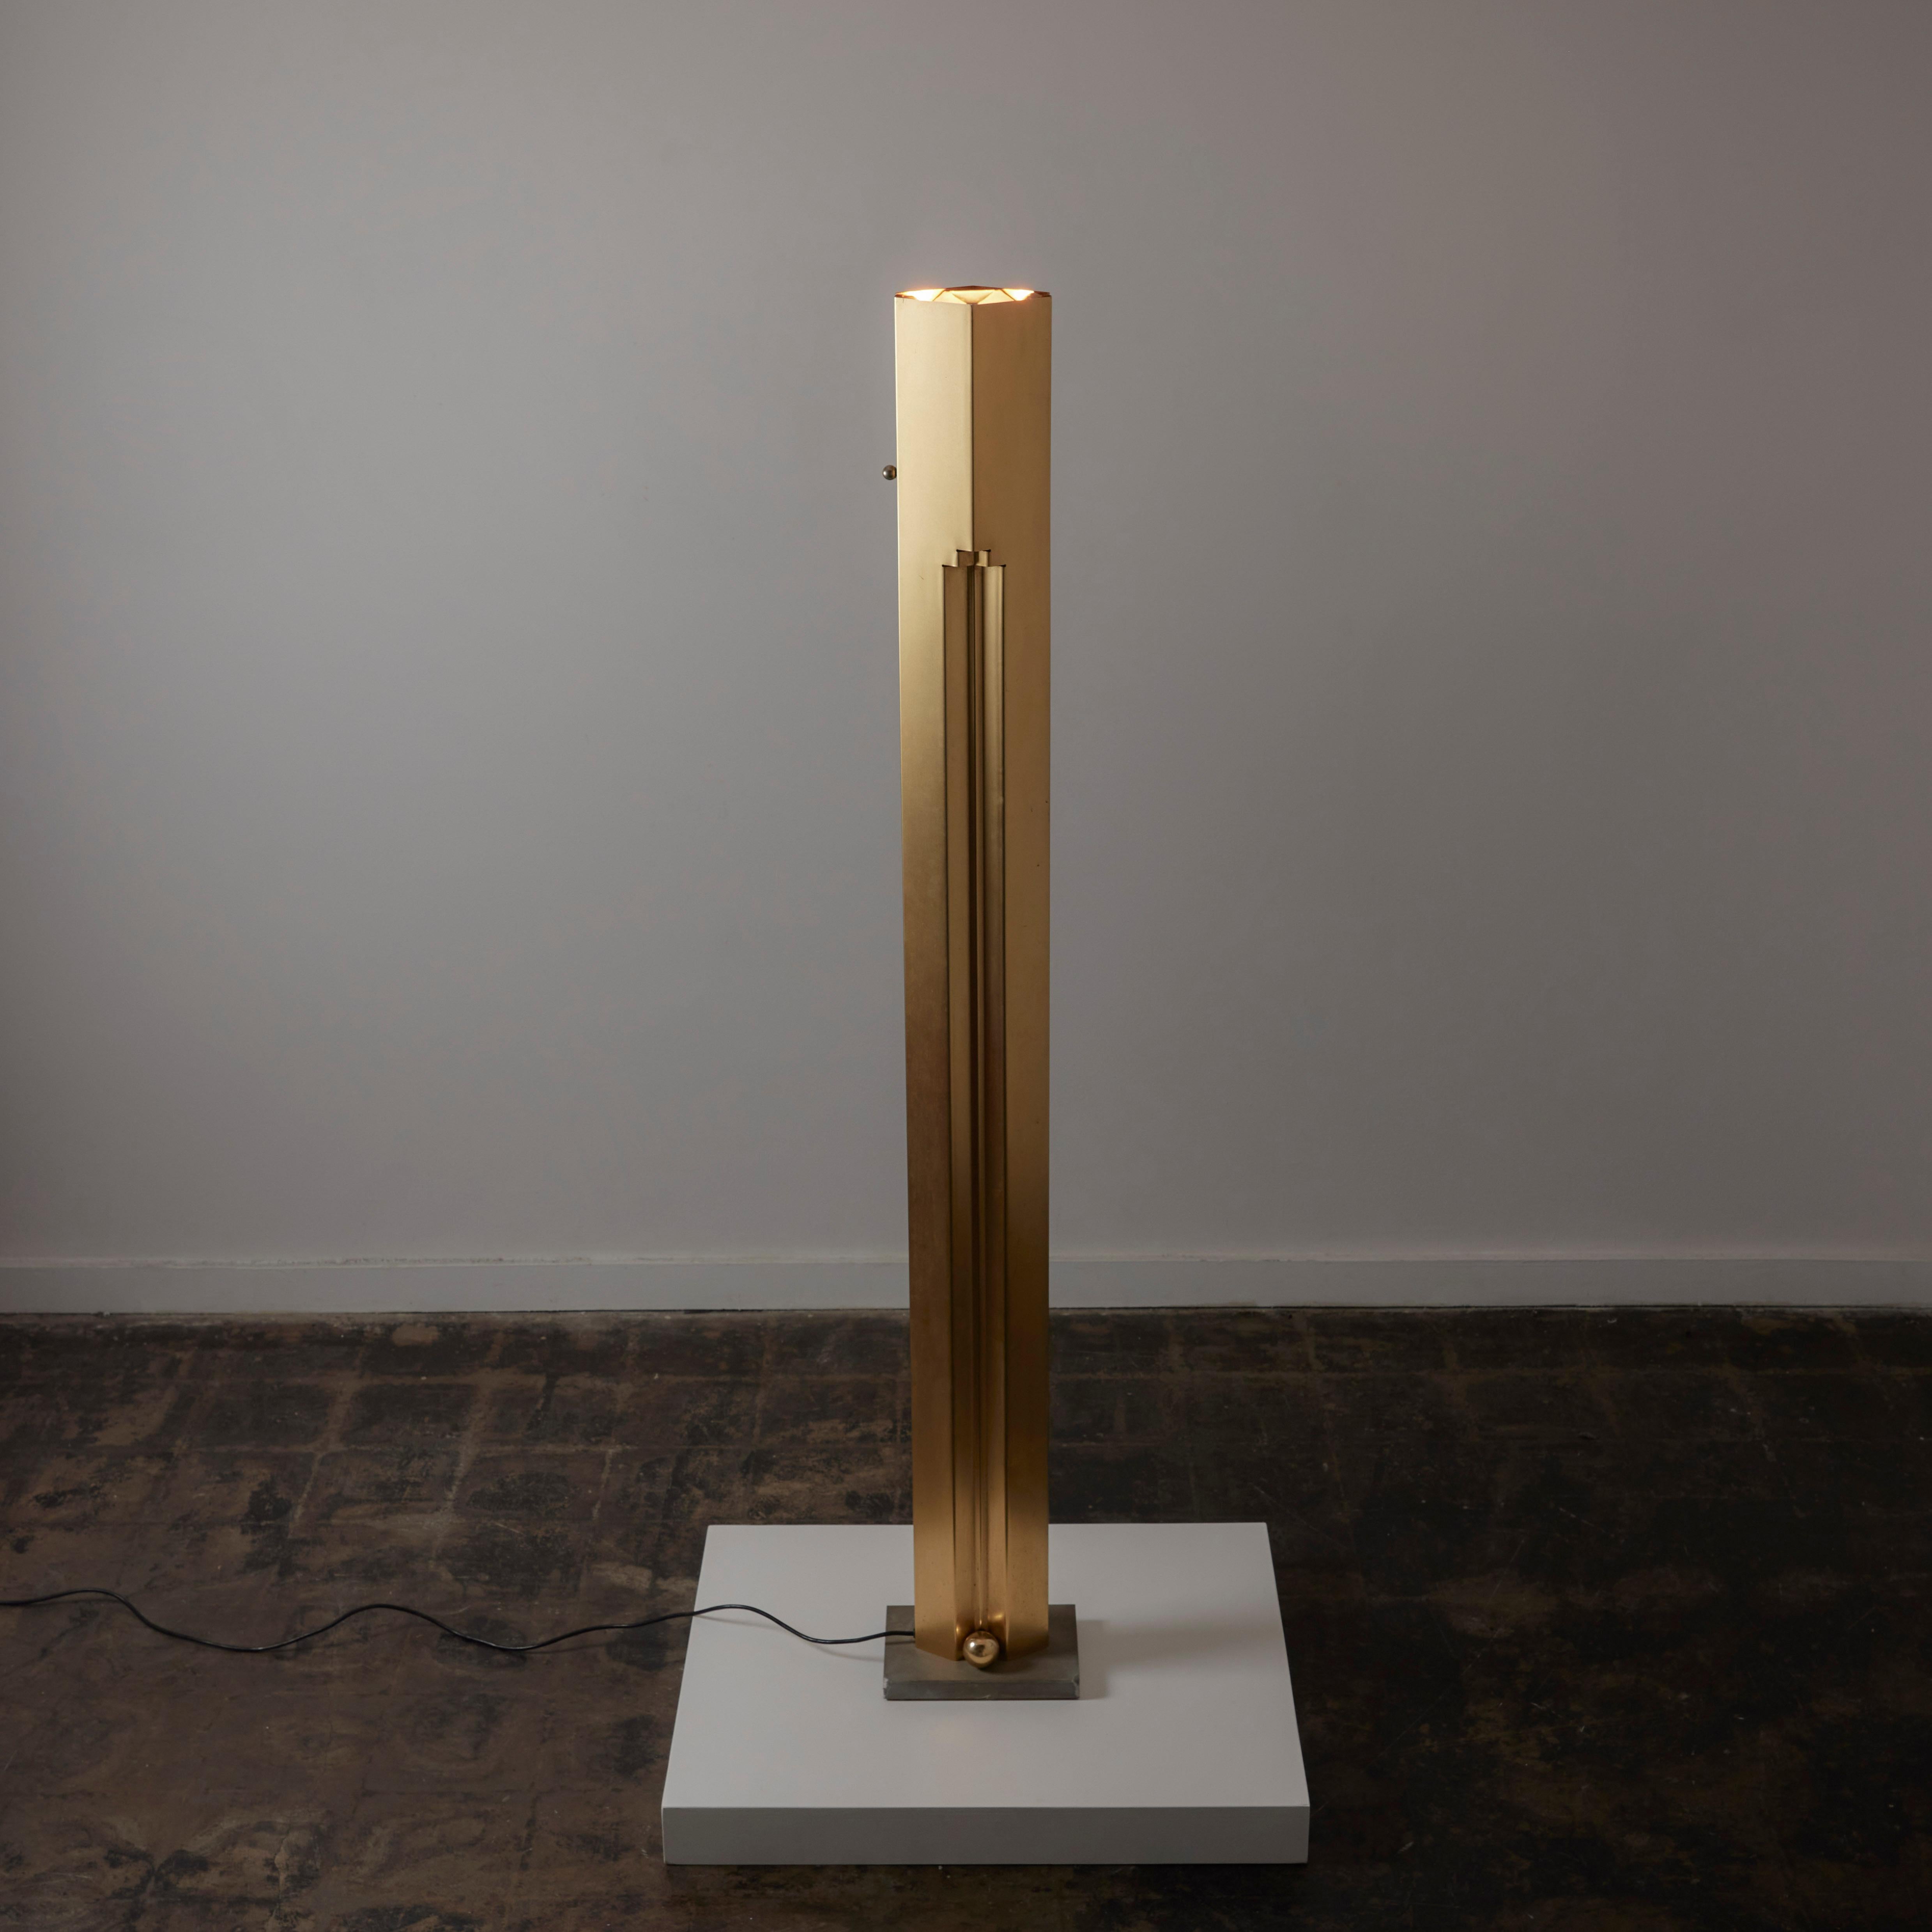 Rare 'Totem' Floor lamp by Kazuhide Takahama for Sirrah Designed and manufactured in Italy, in 1982. A monolithic brass floor lamp with typographical trim detailing running along the length of the piece. Brass ball finials are added at the bottom